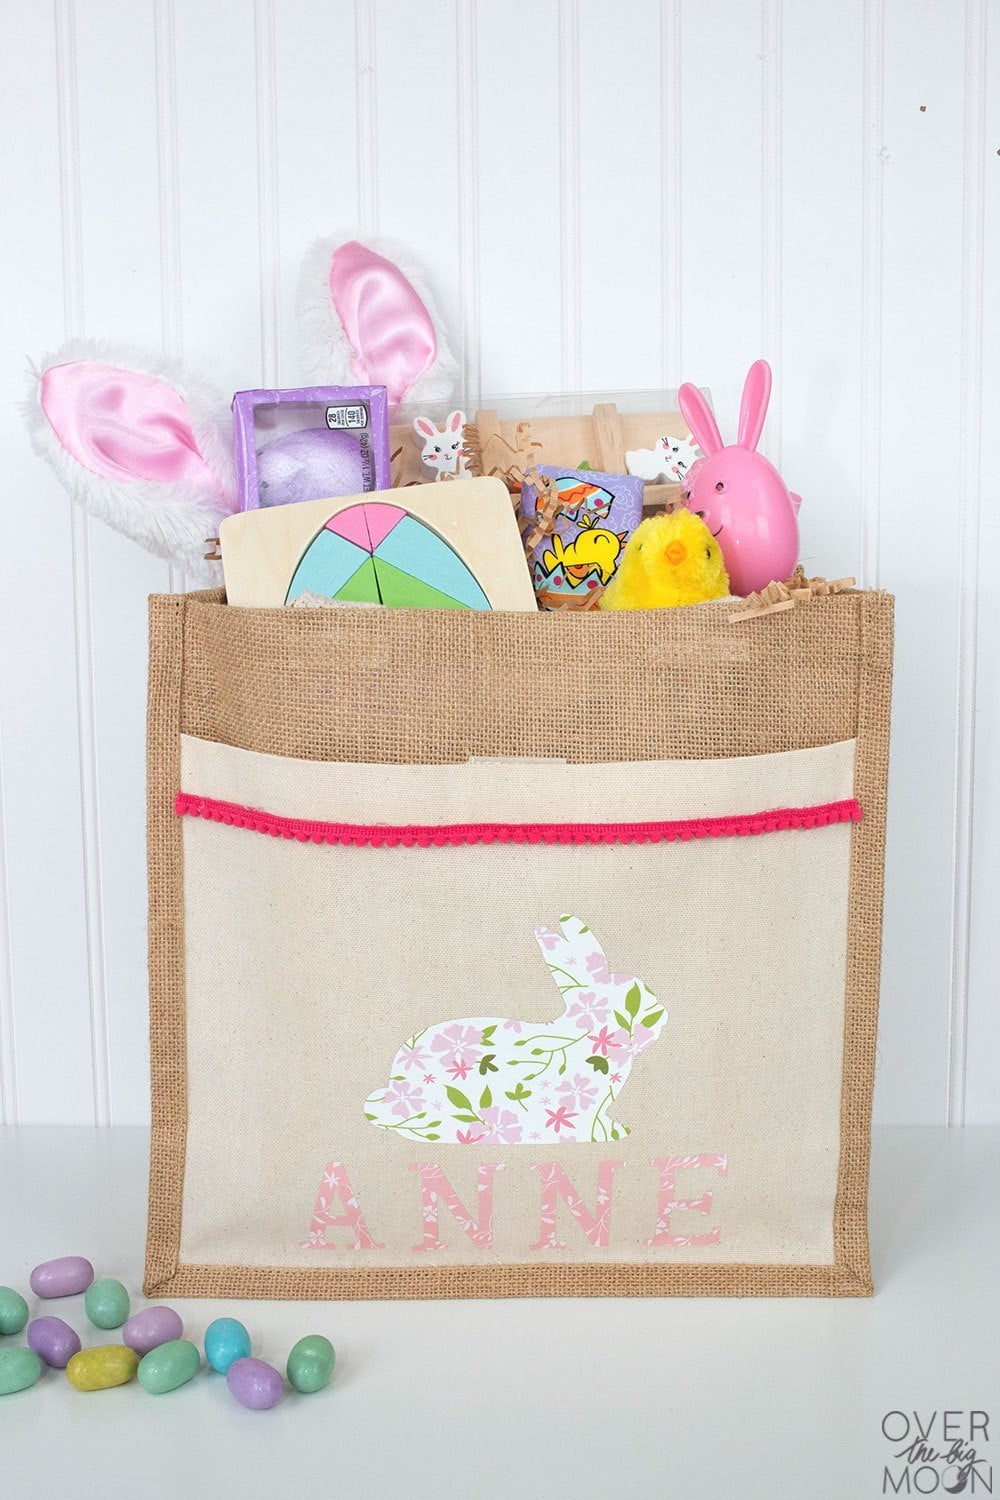 pouch style bag made of burlap with iron on print of white bunny with pink flowers with the name ANNE below it. 